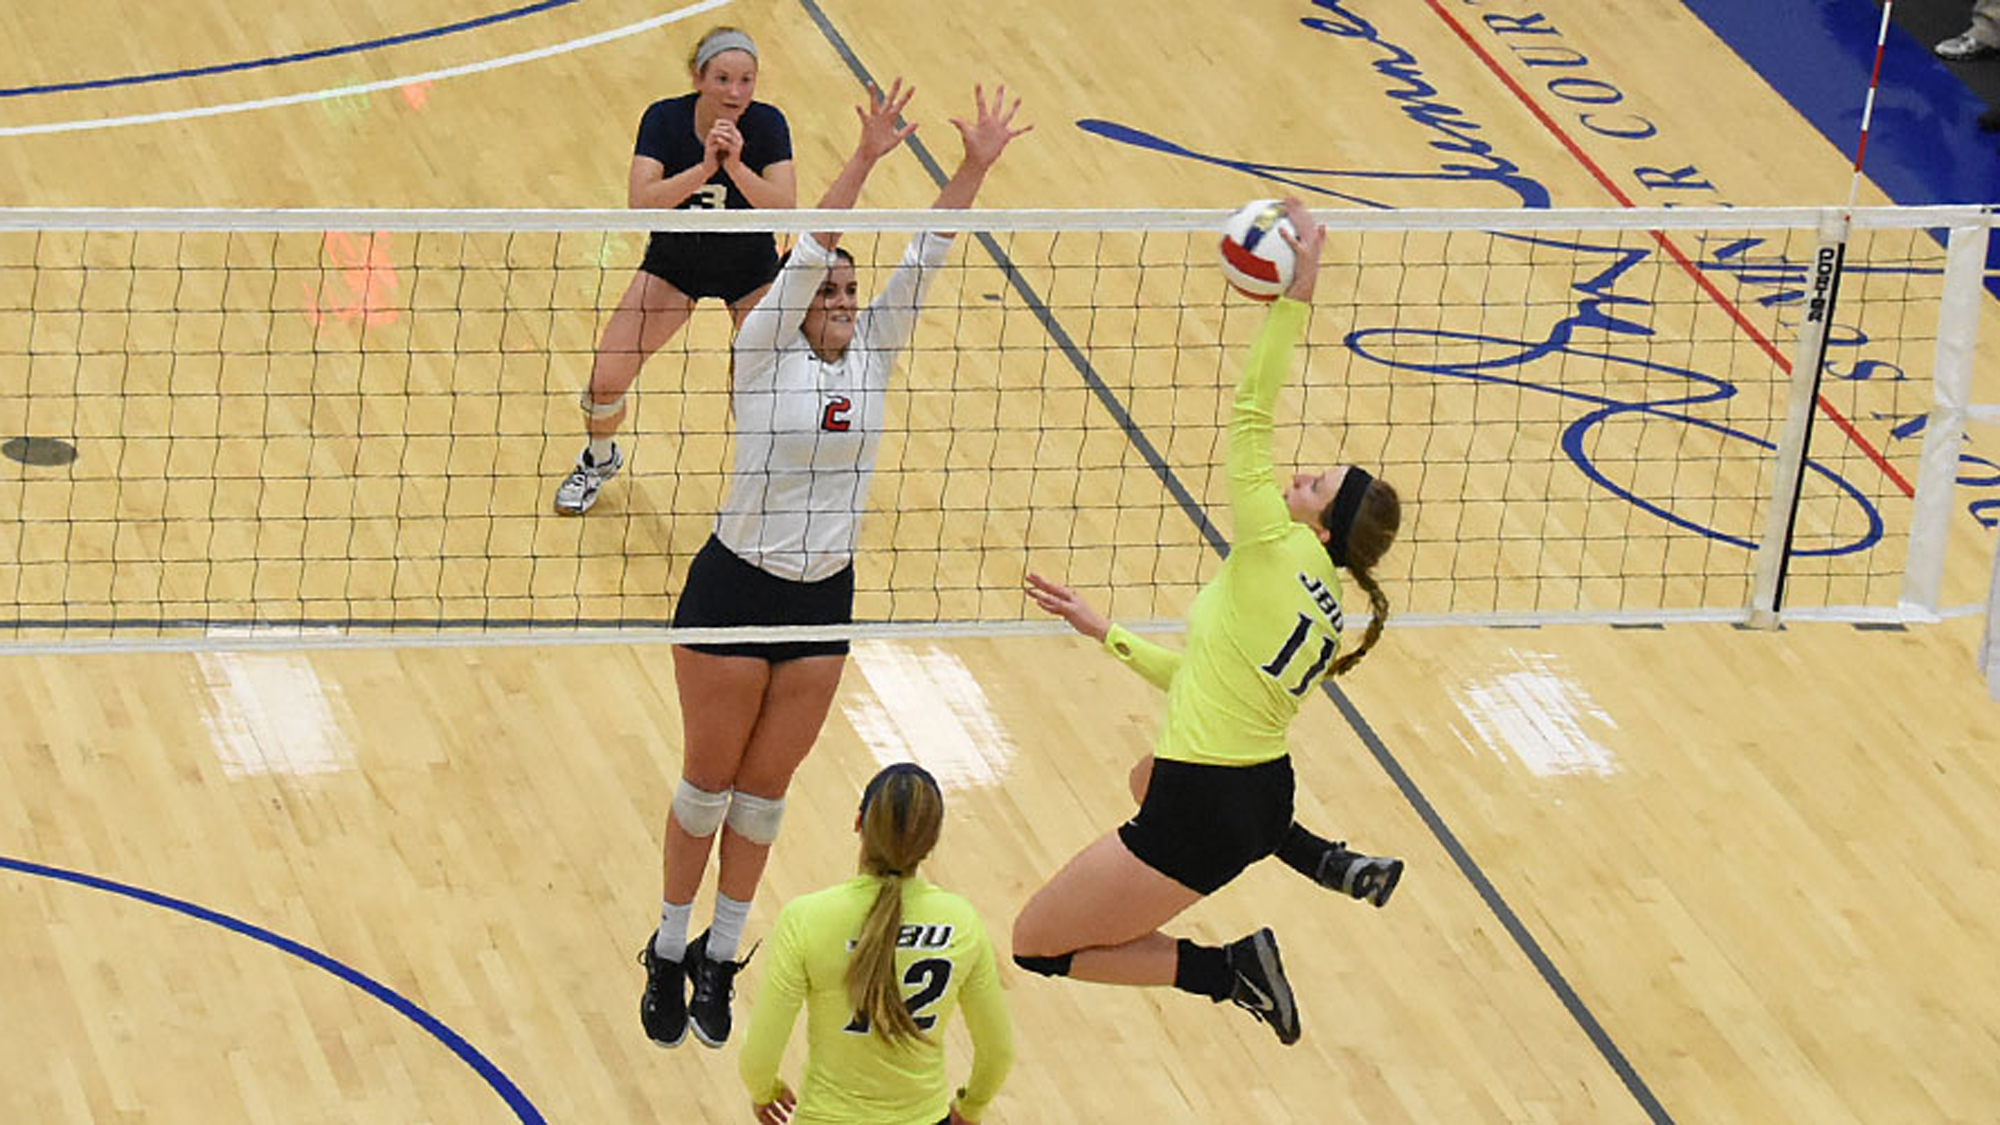 Blocking, timely runs fuel volleyball’s rally to earn home court advantage